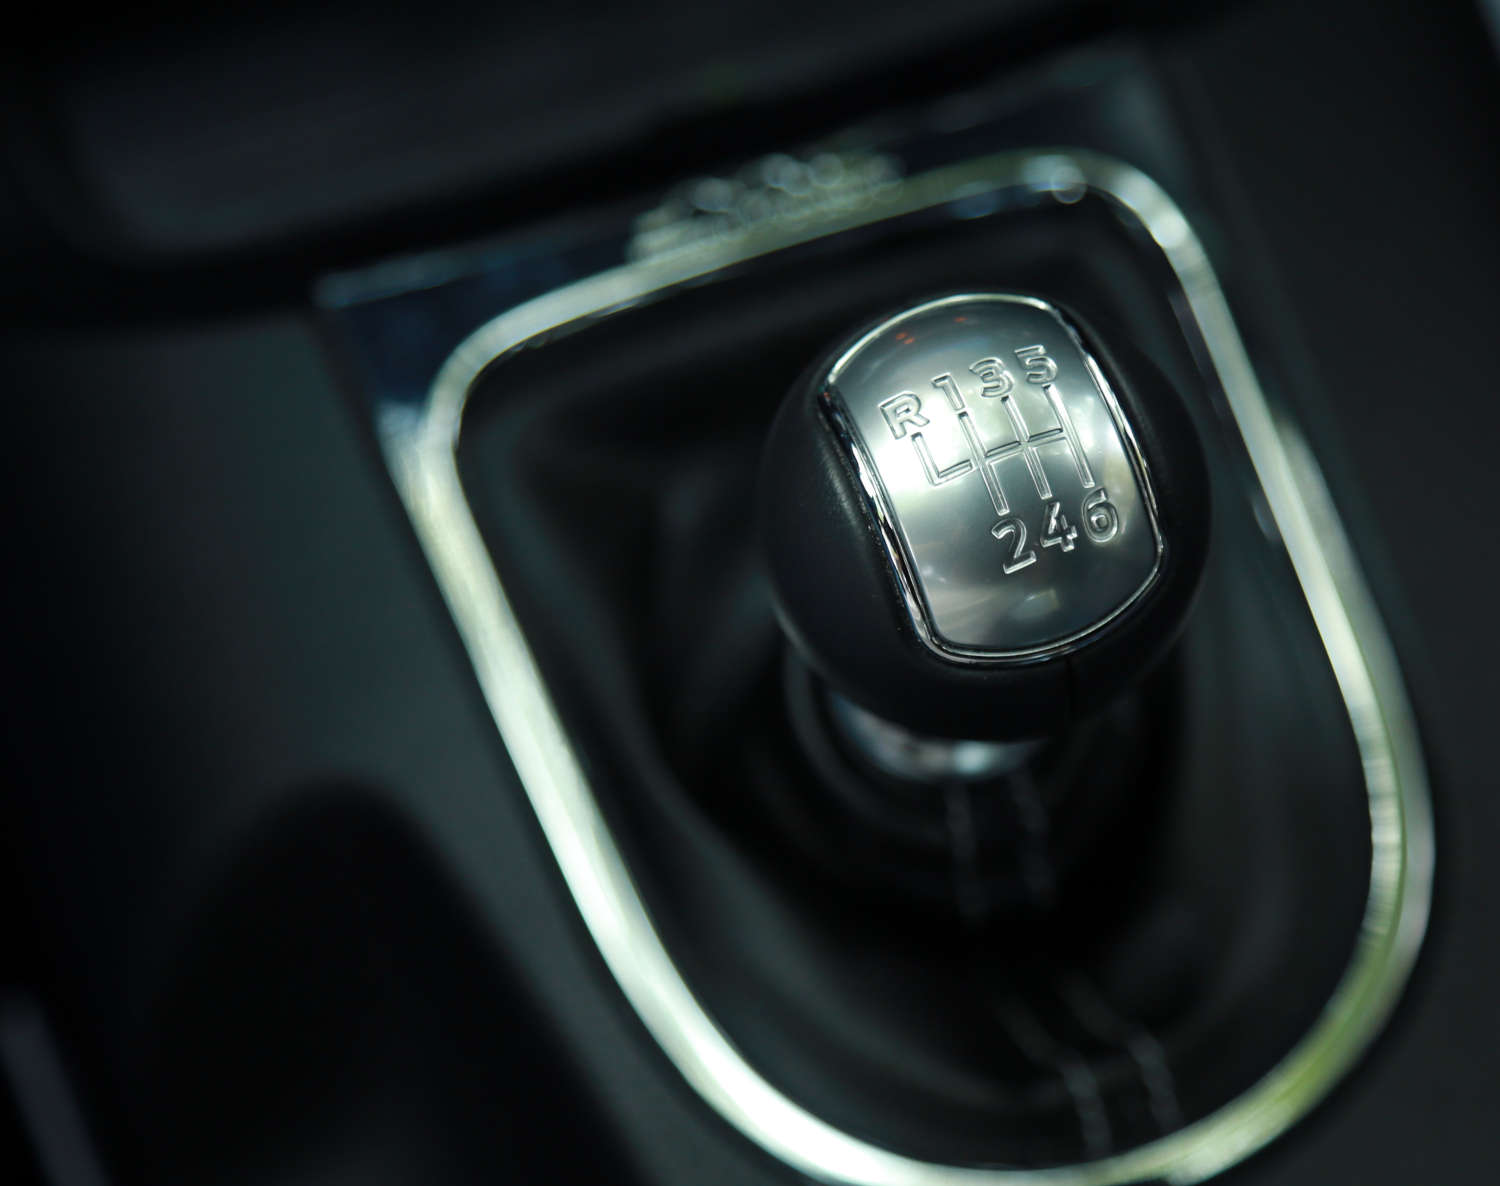 The difference between a manual and an automatic transmission, manual option seen here